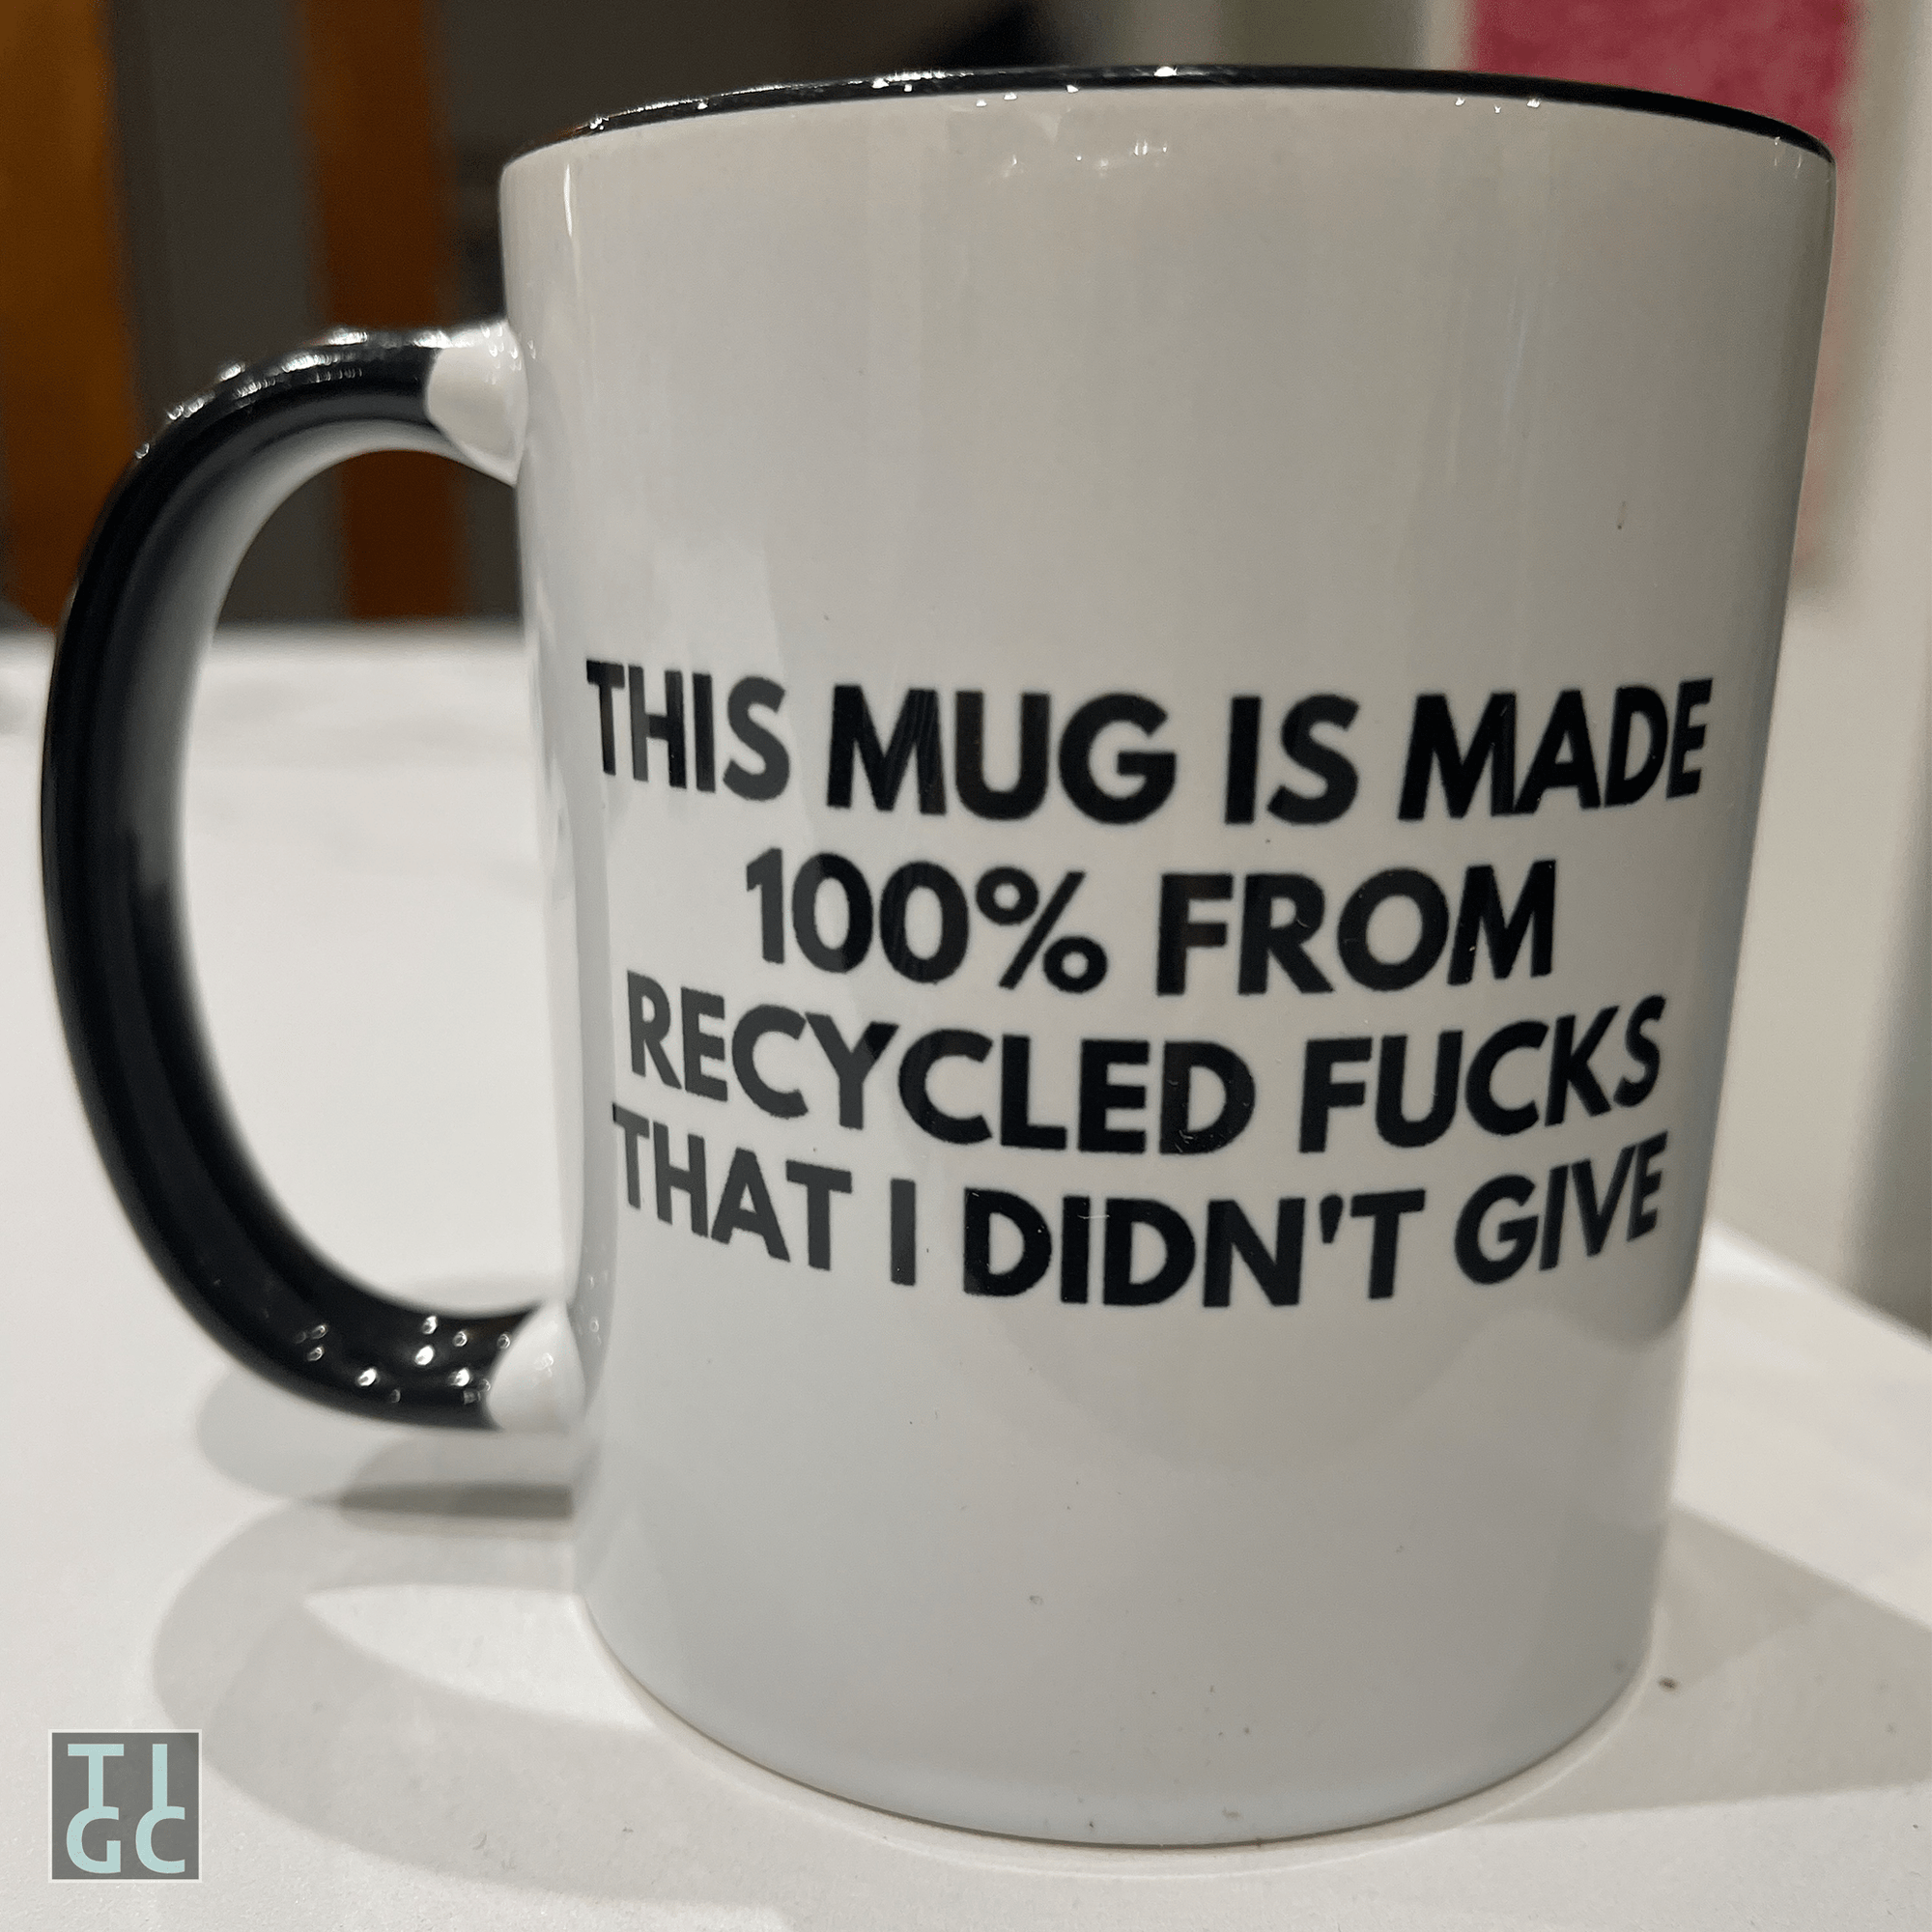 TIGC The Inappropriate Gift Co 100% Recycled Fucks